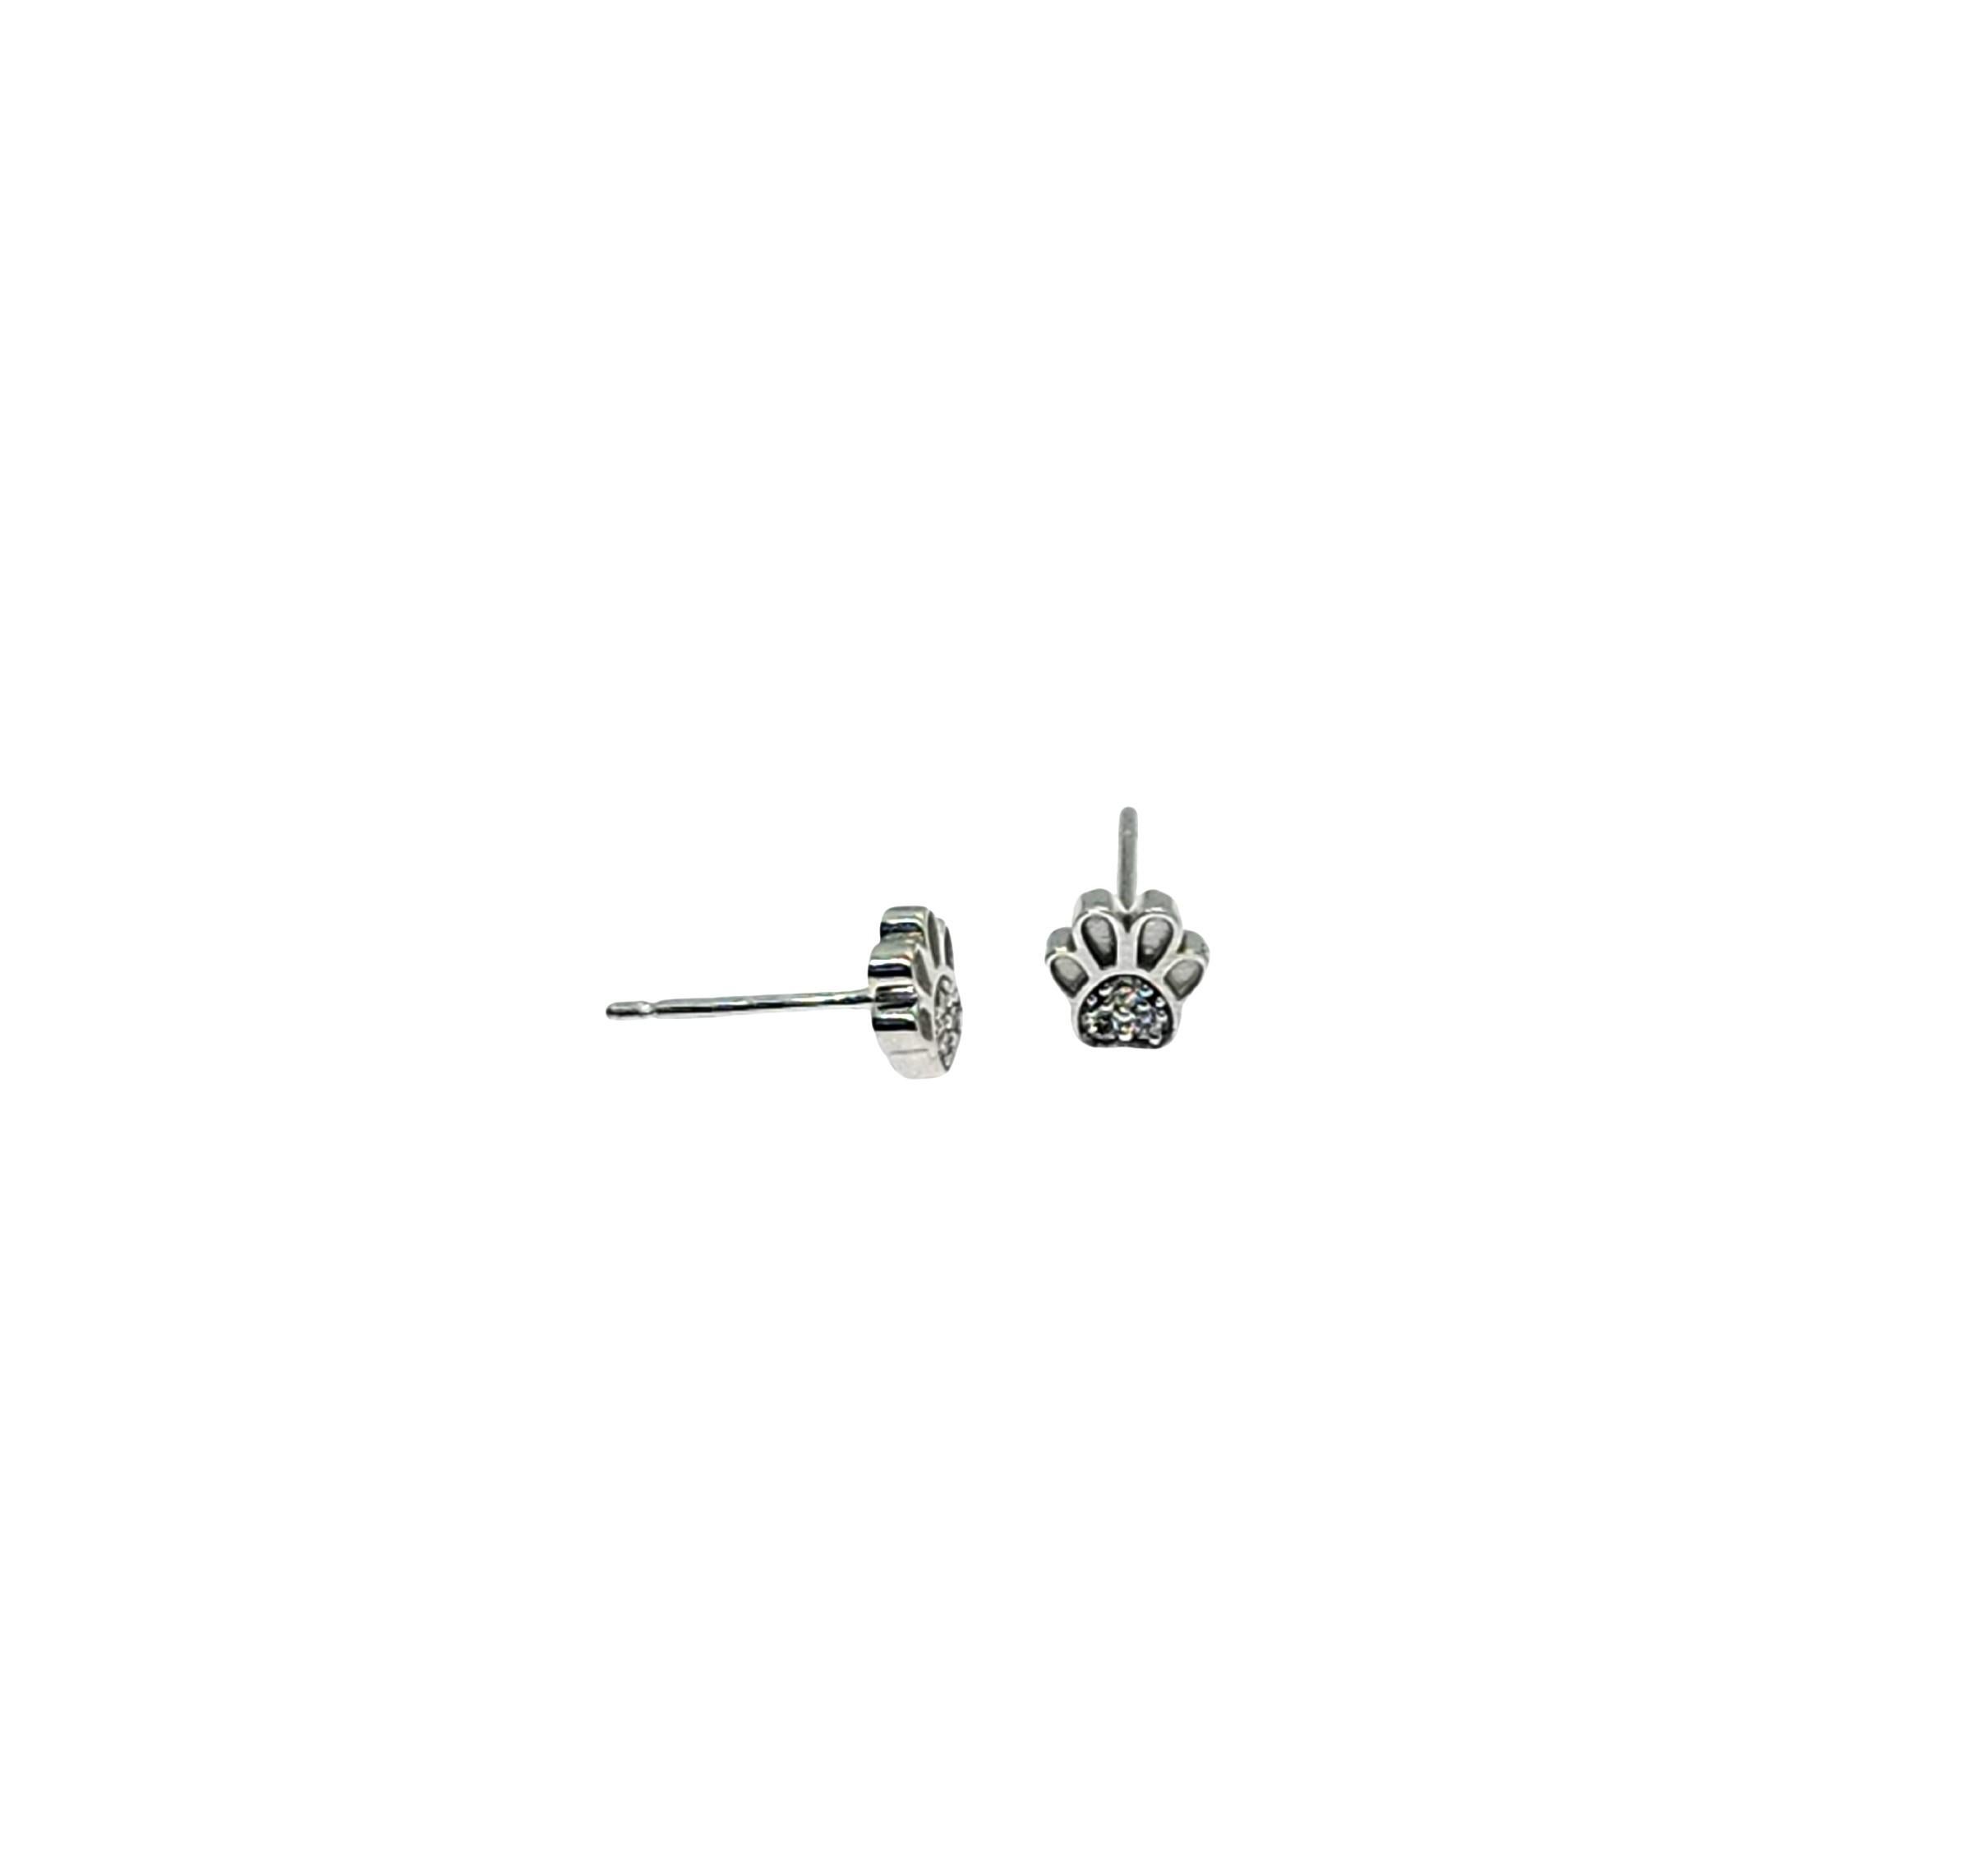 Brilliant Cut New Mini Paw Print 14K White Gold and Diamond Stud Earrings For Multi Piercings For Sale